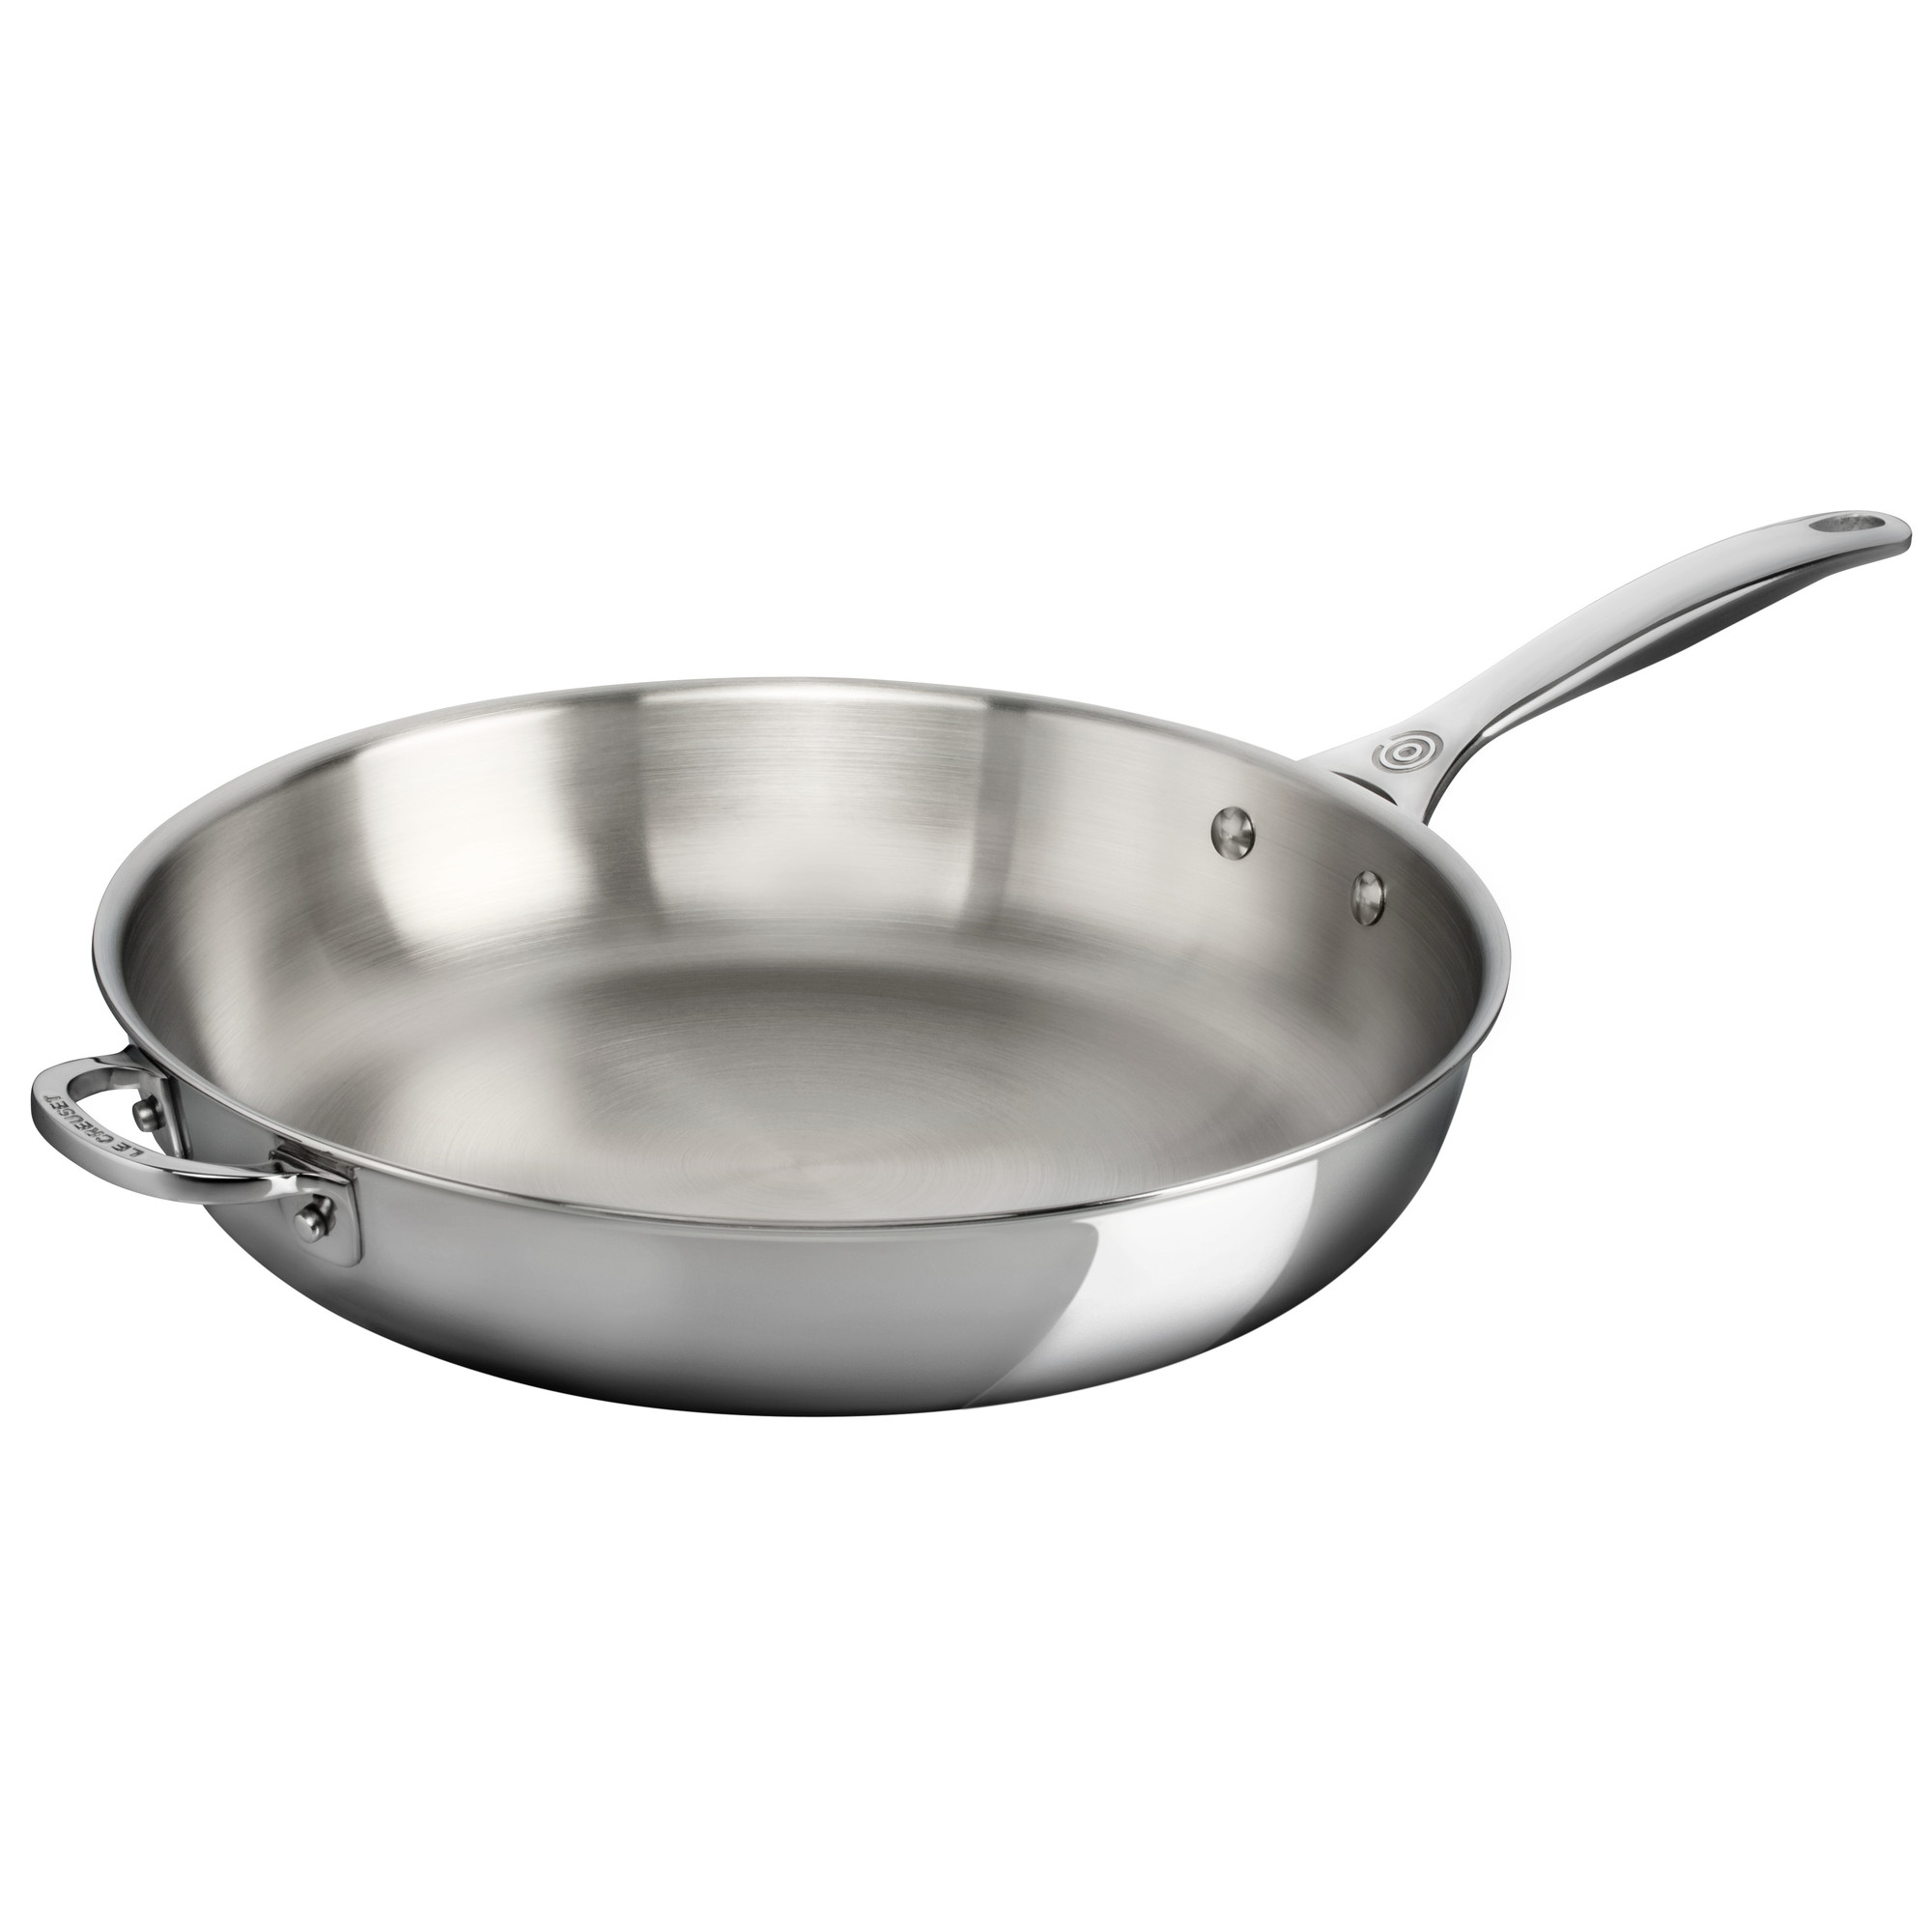 Le Creuset 12.5" Stainless Steel Deep Pan With Handle